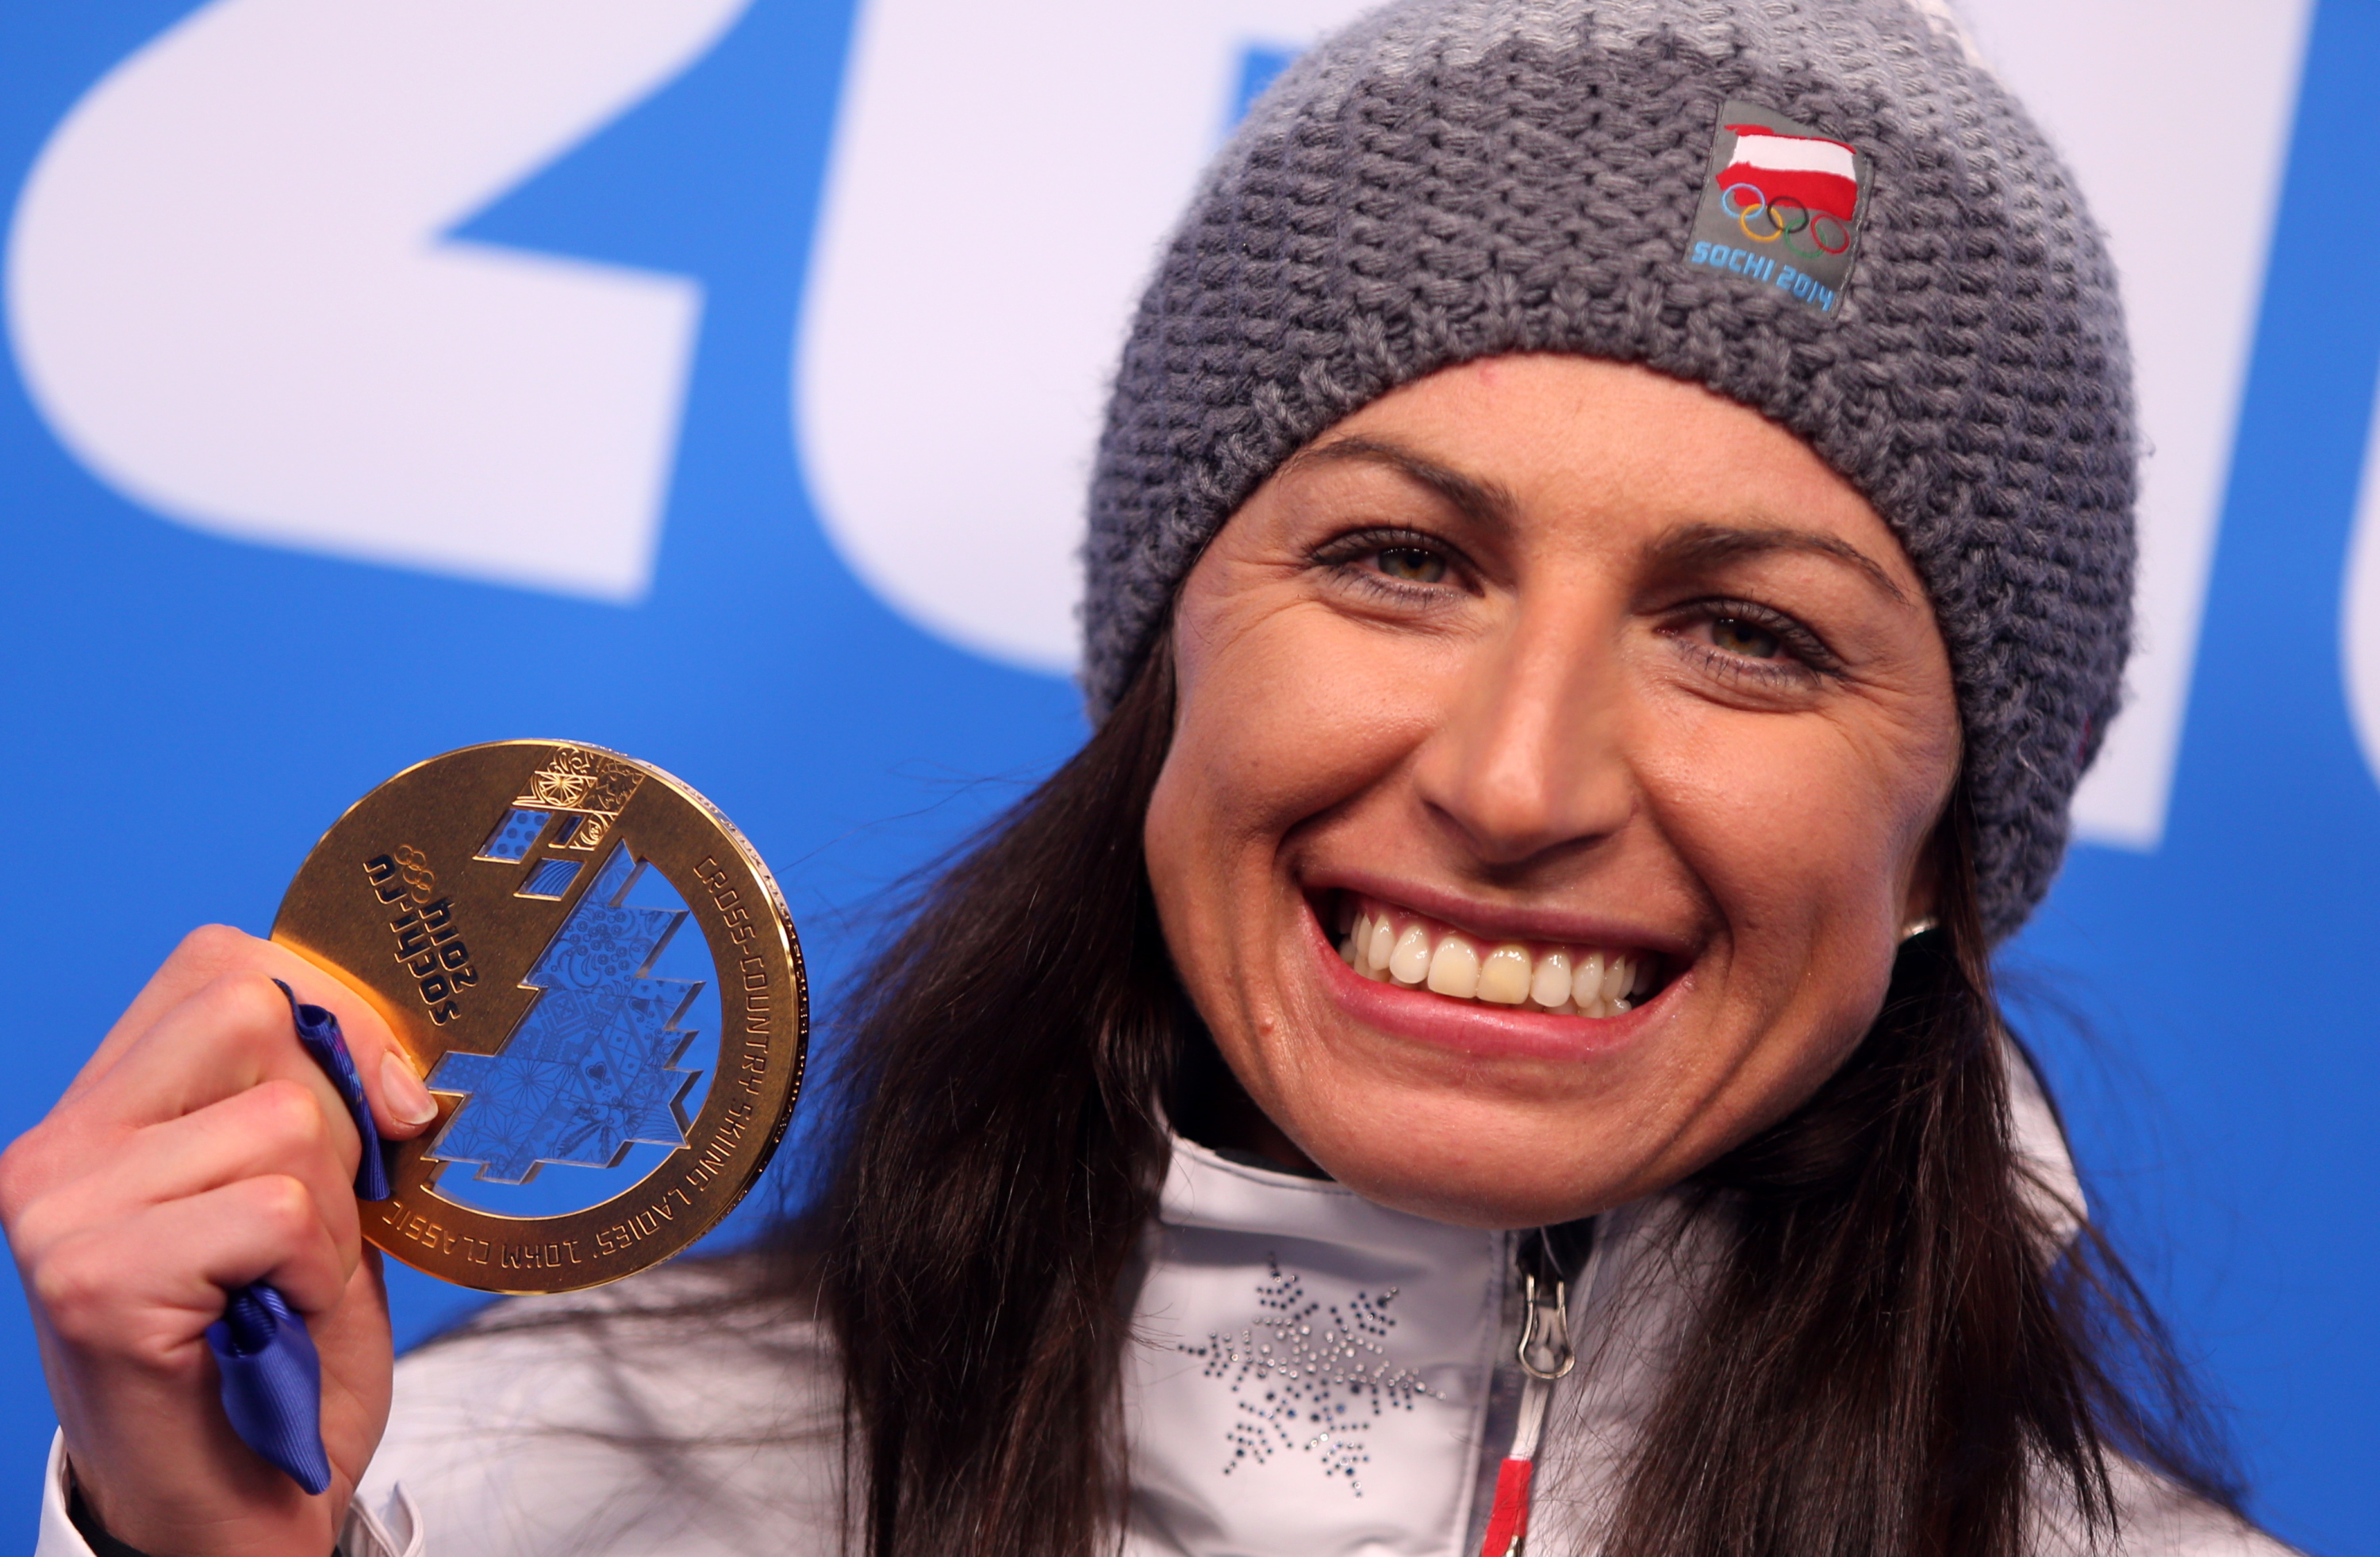 Justyna Kowalczyk Polish skier wallpapers and images - wallpapers